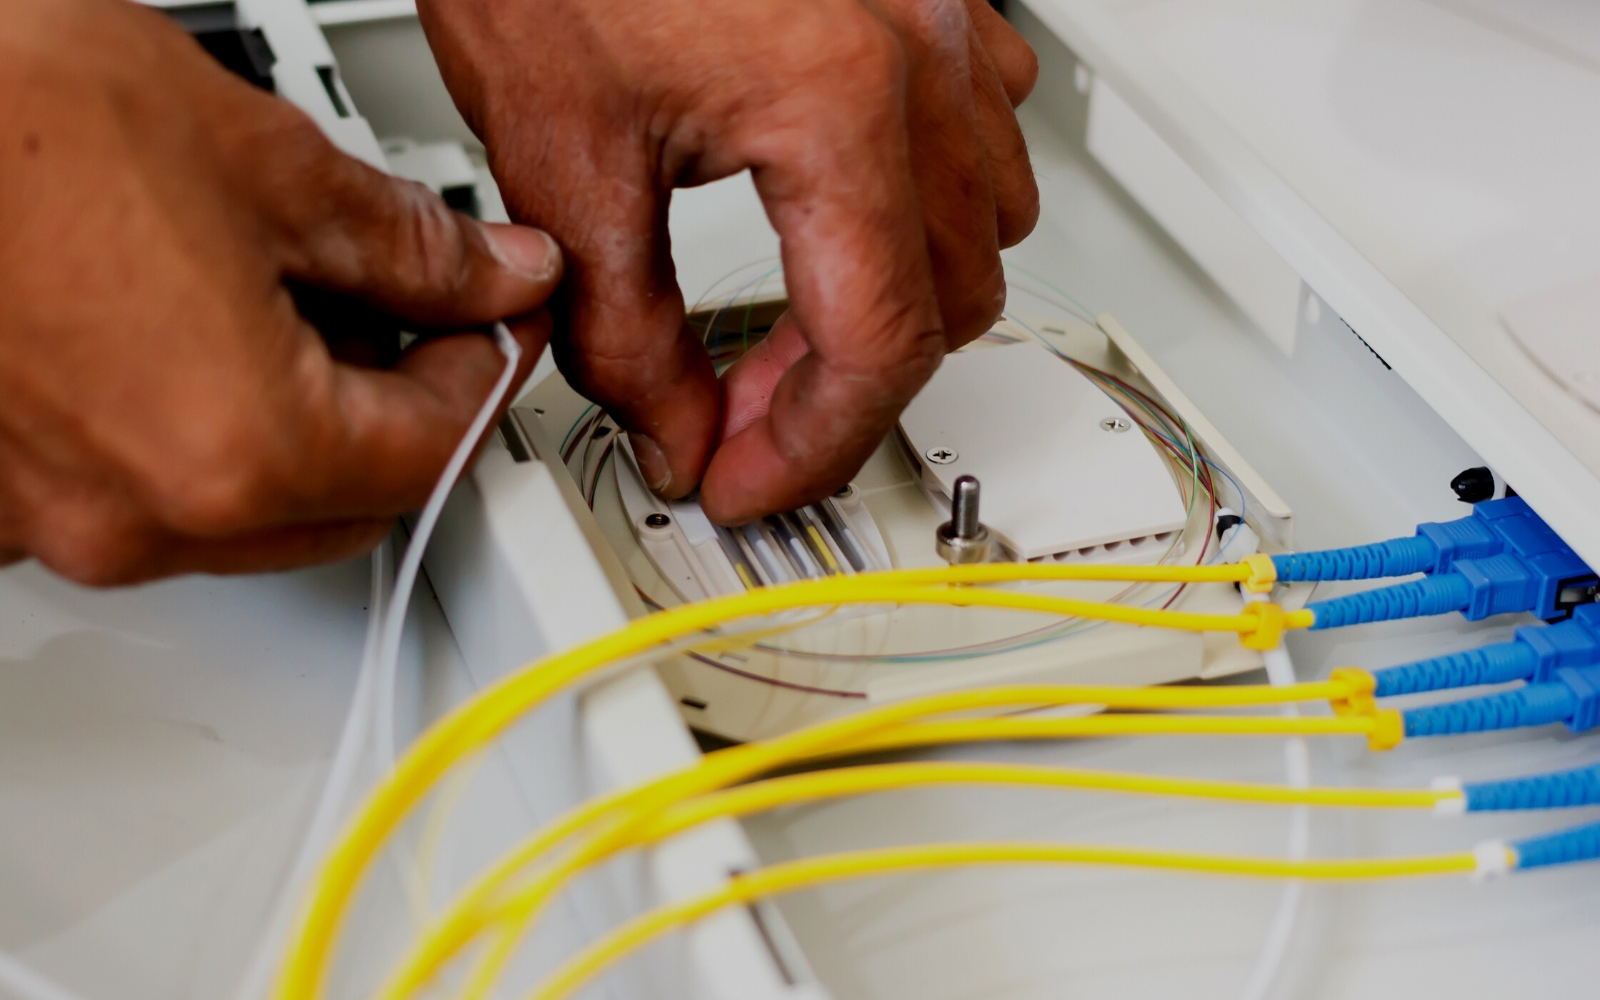 How do I connect a fiber optic cable to Ethernet